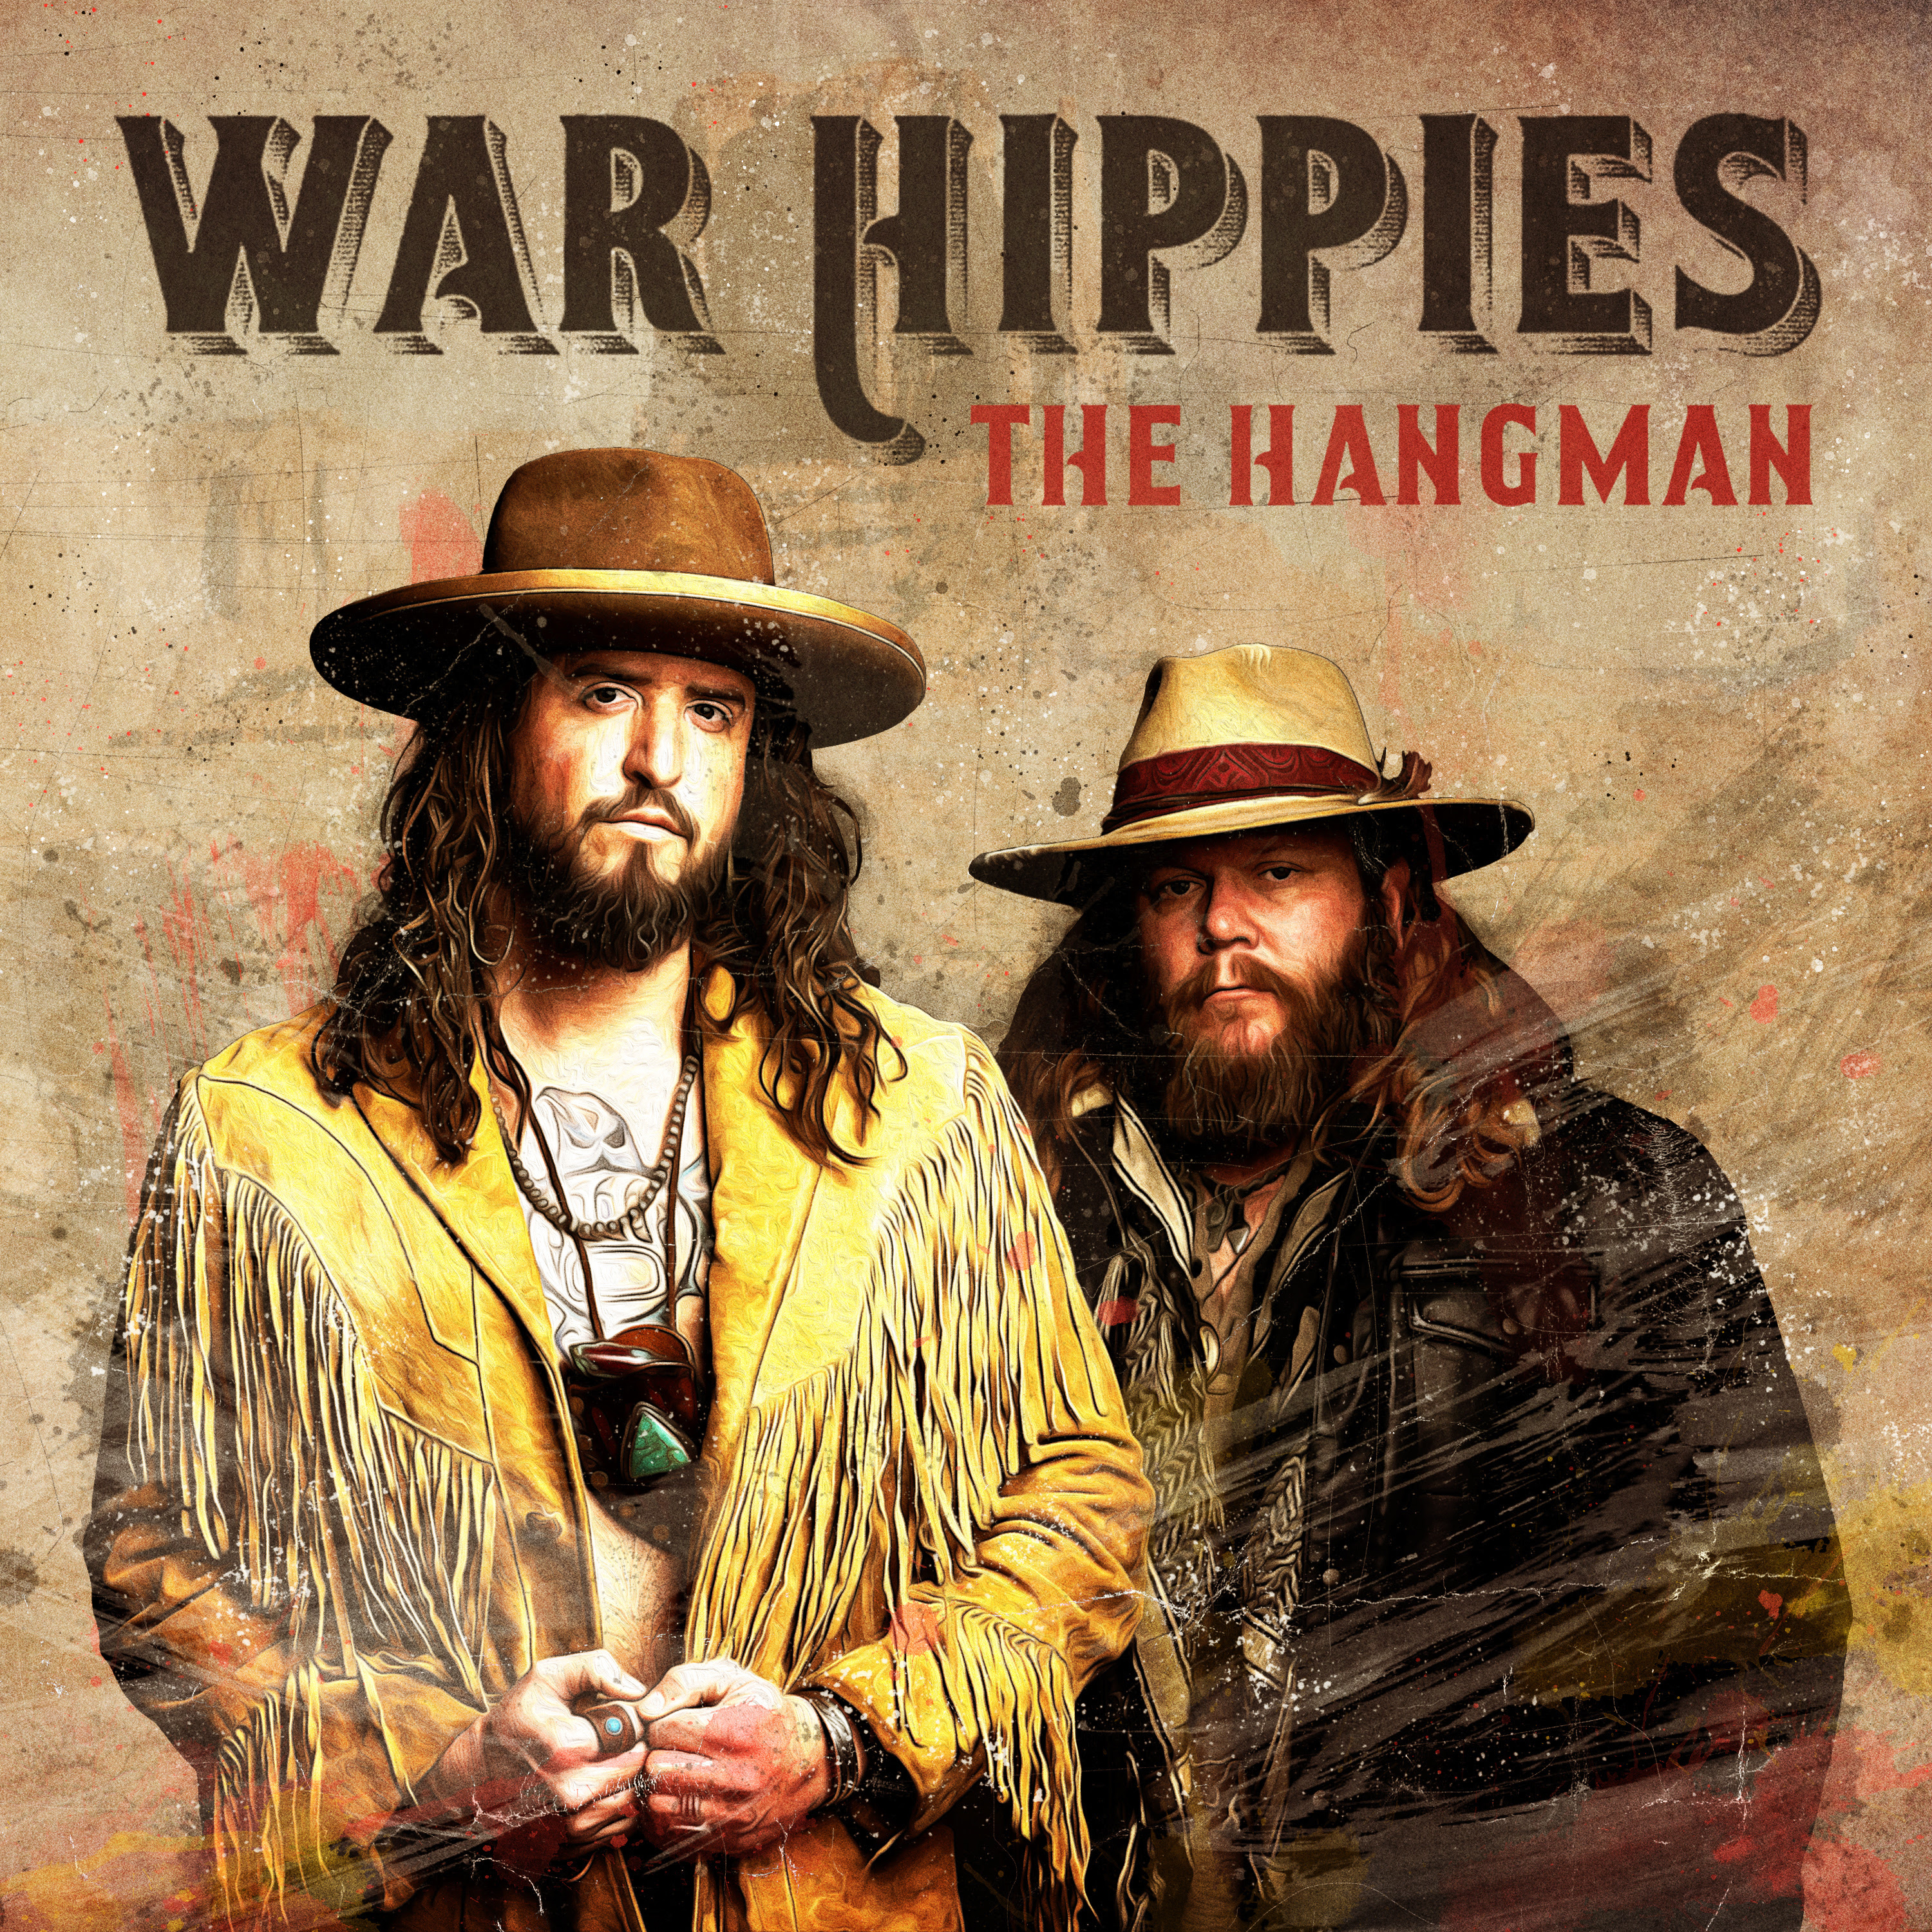 Various Artists - Only the Hangman: lyrics and songs